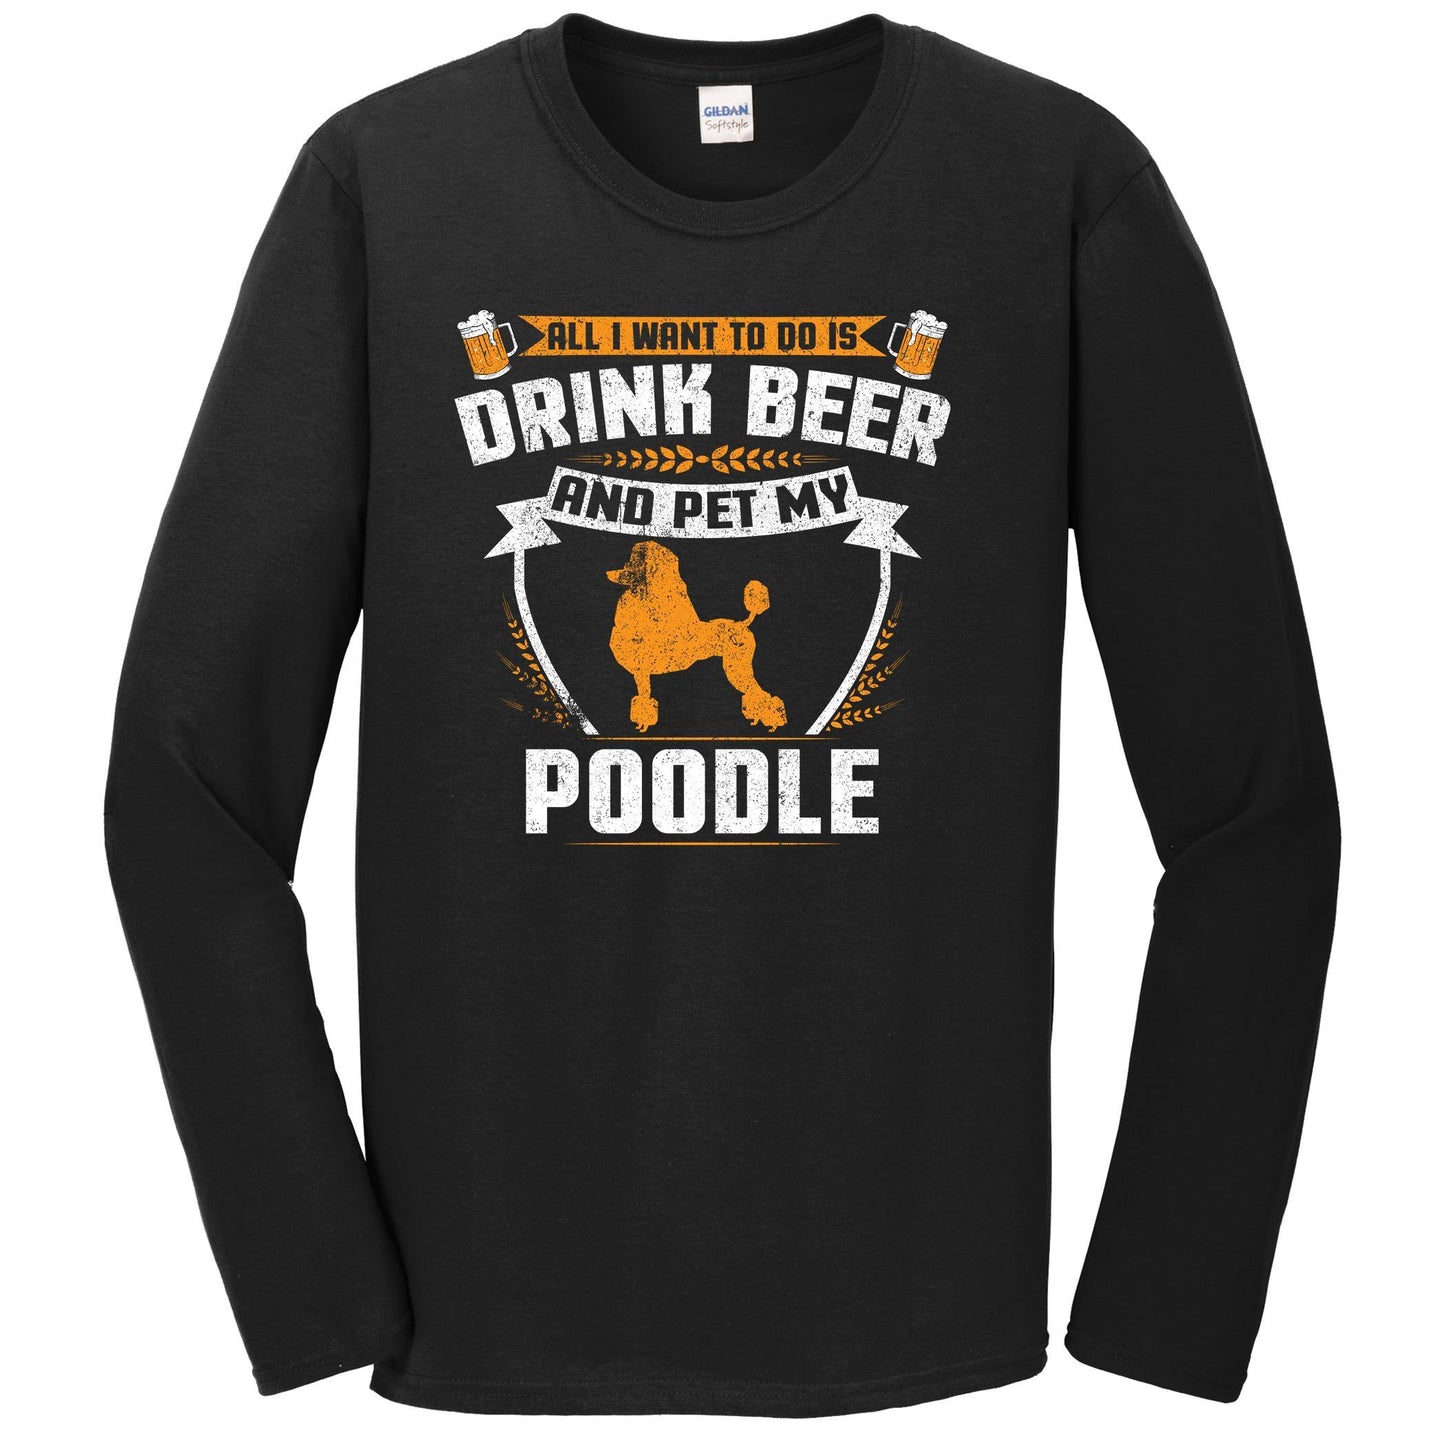 All I Want To Do Is Drink Beer And Pet My Poodle Funny Dog Owner Long Sleeve Shirt